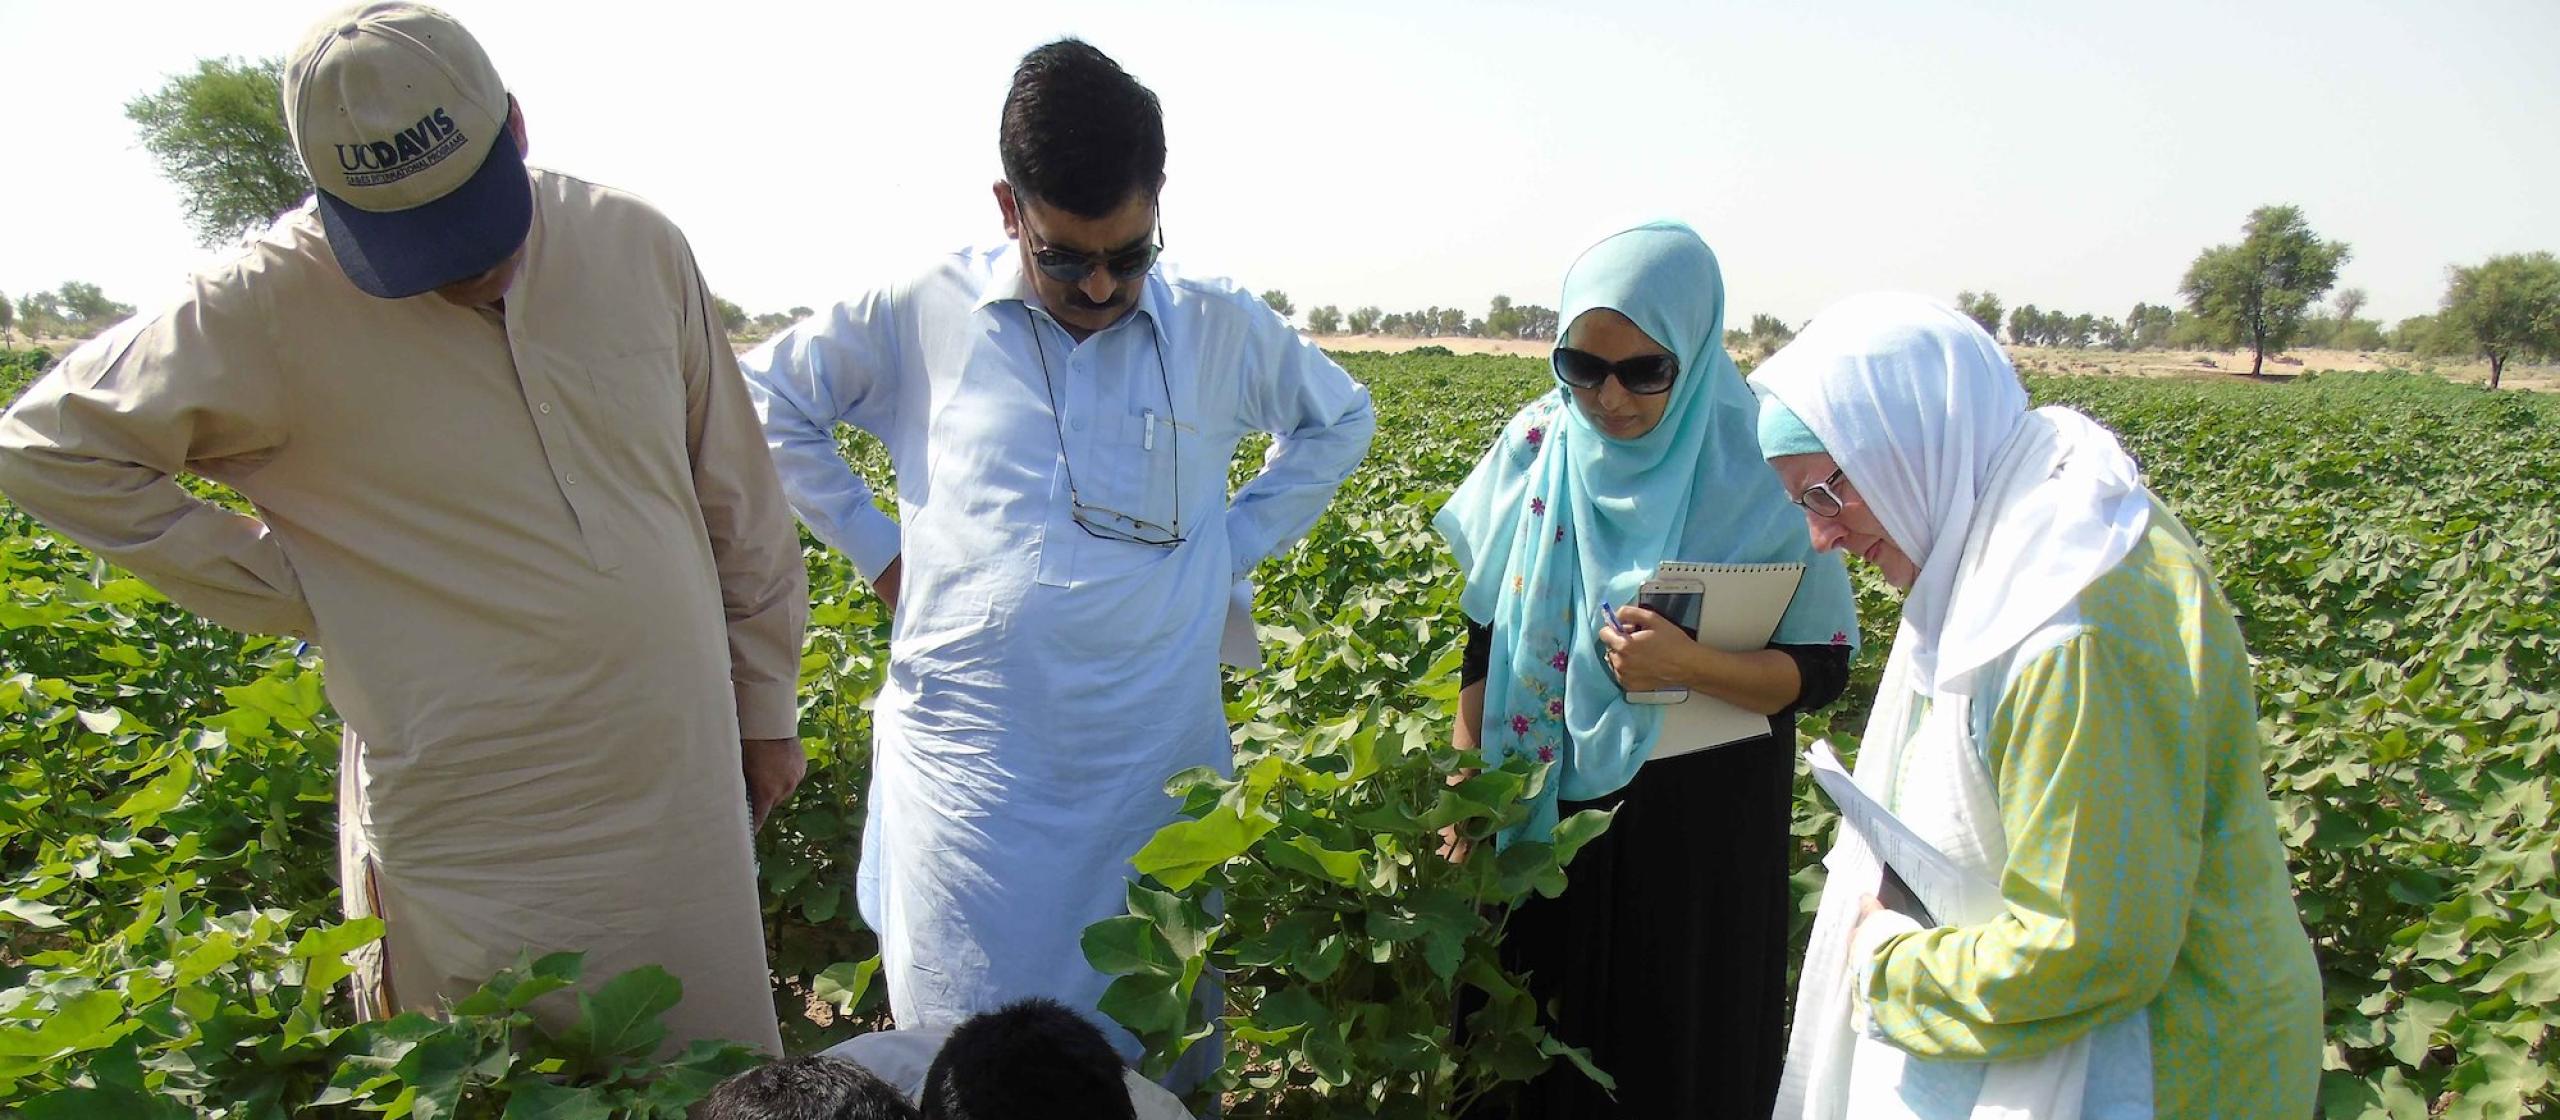 Dr Sandra Heany-Mustafa’s journey to working with people in Pakistan is helping build farmer skills and share local knowledge.